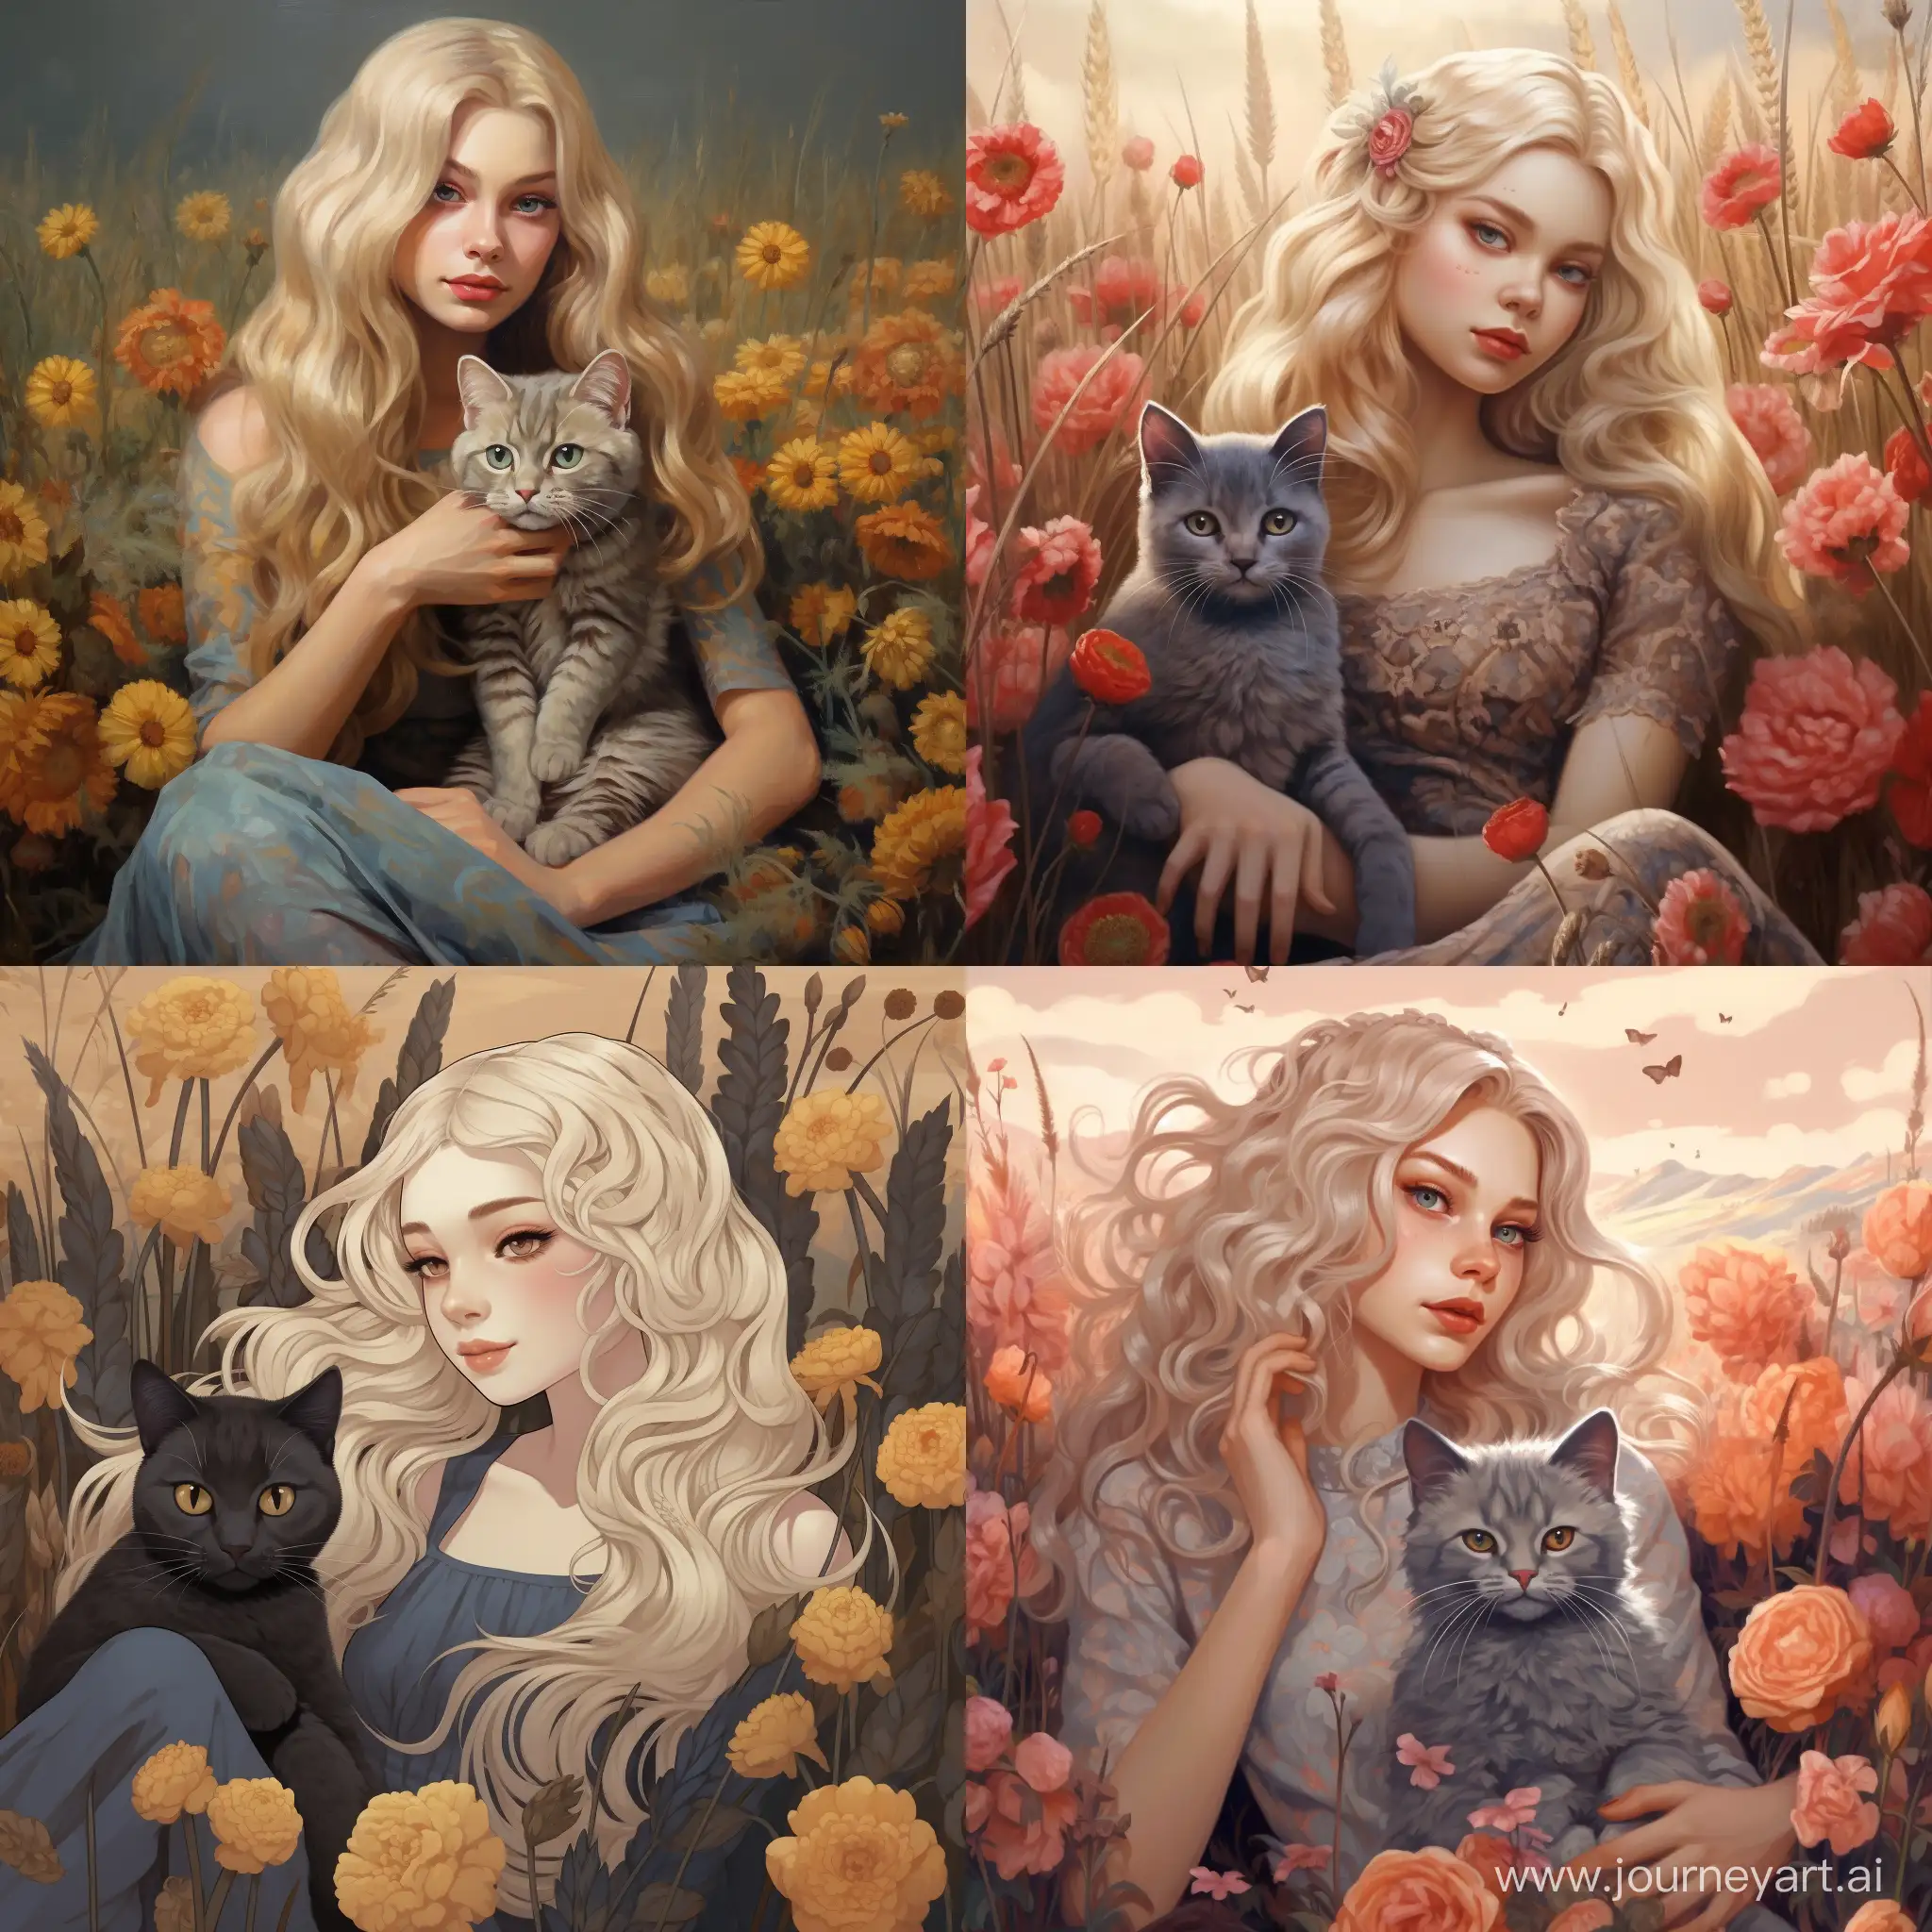 Blonde-Girl-Embracing-Nature-with-a-Gray-Cat-in-a-Field-of-Flowers